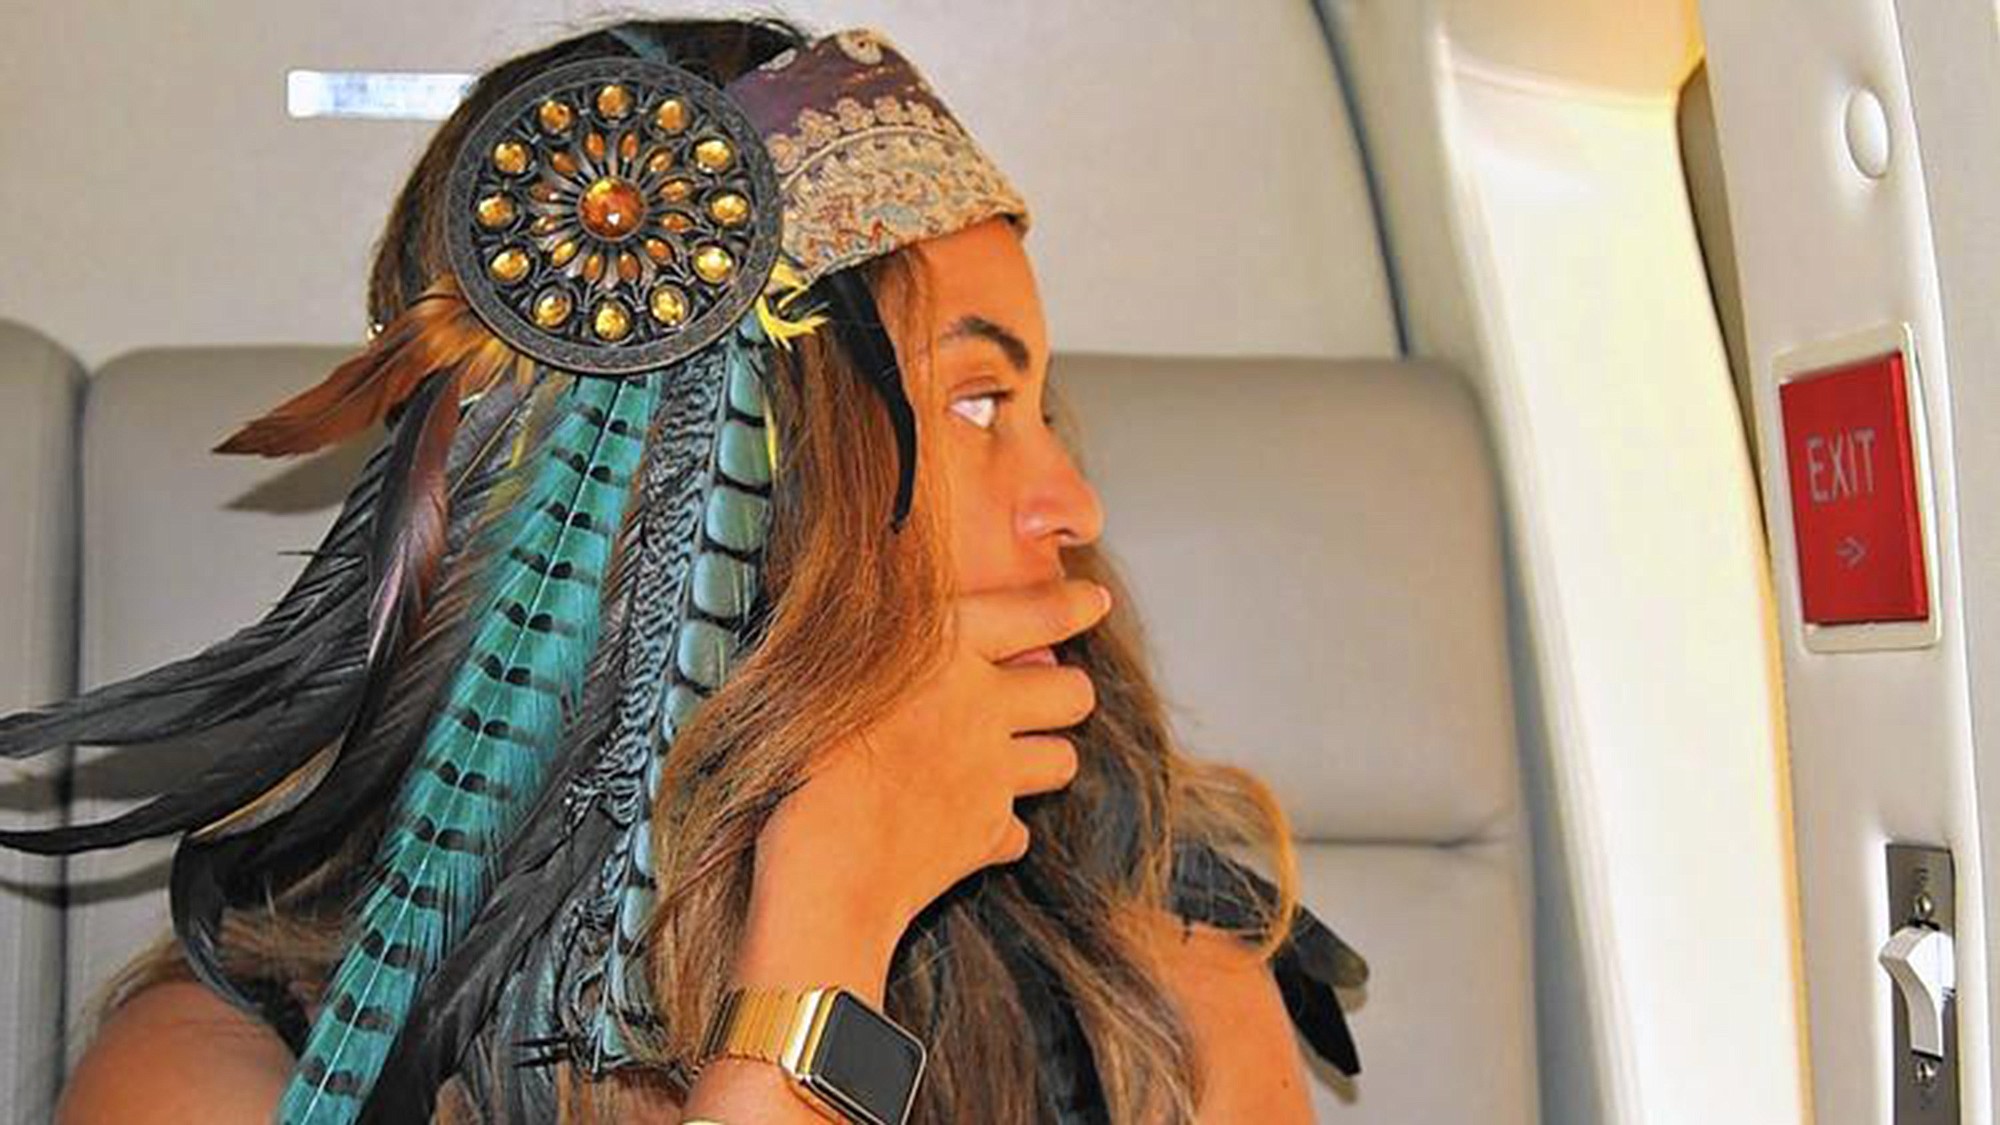 Beyonce sports her custom-made 18-karat gold link Apple Watch, which is estimated to be worth more than $17,000.